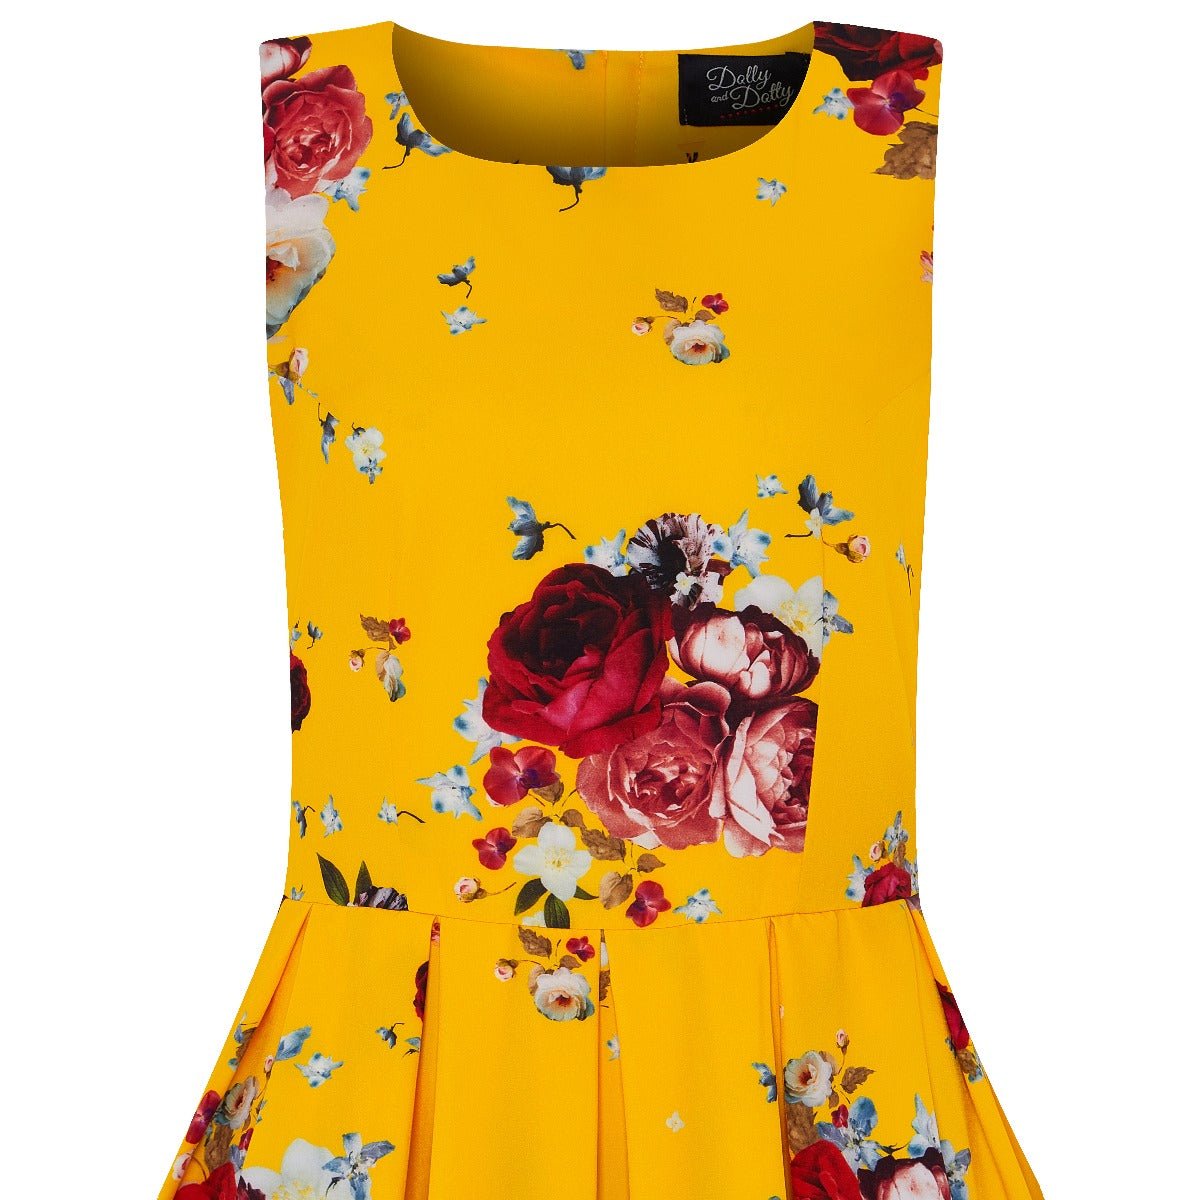 Annie Retro Swing Dress in Yellow/Red Rose Bunch Print